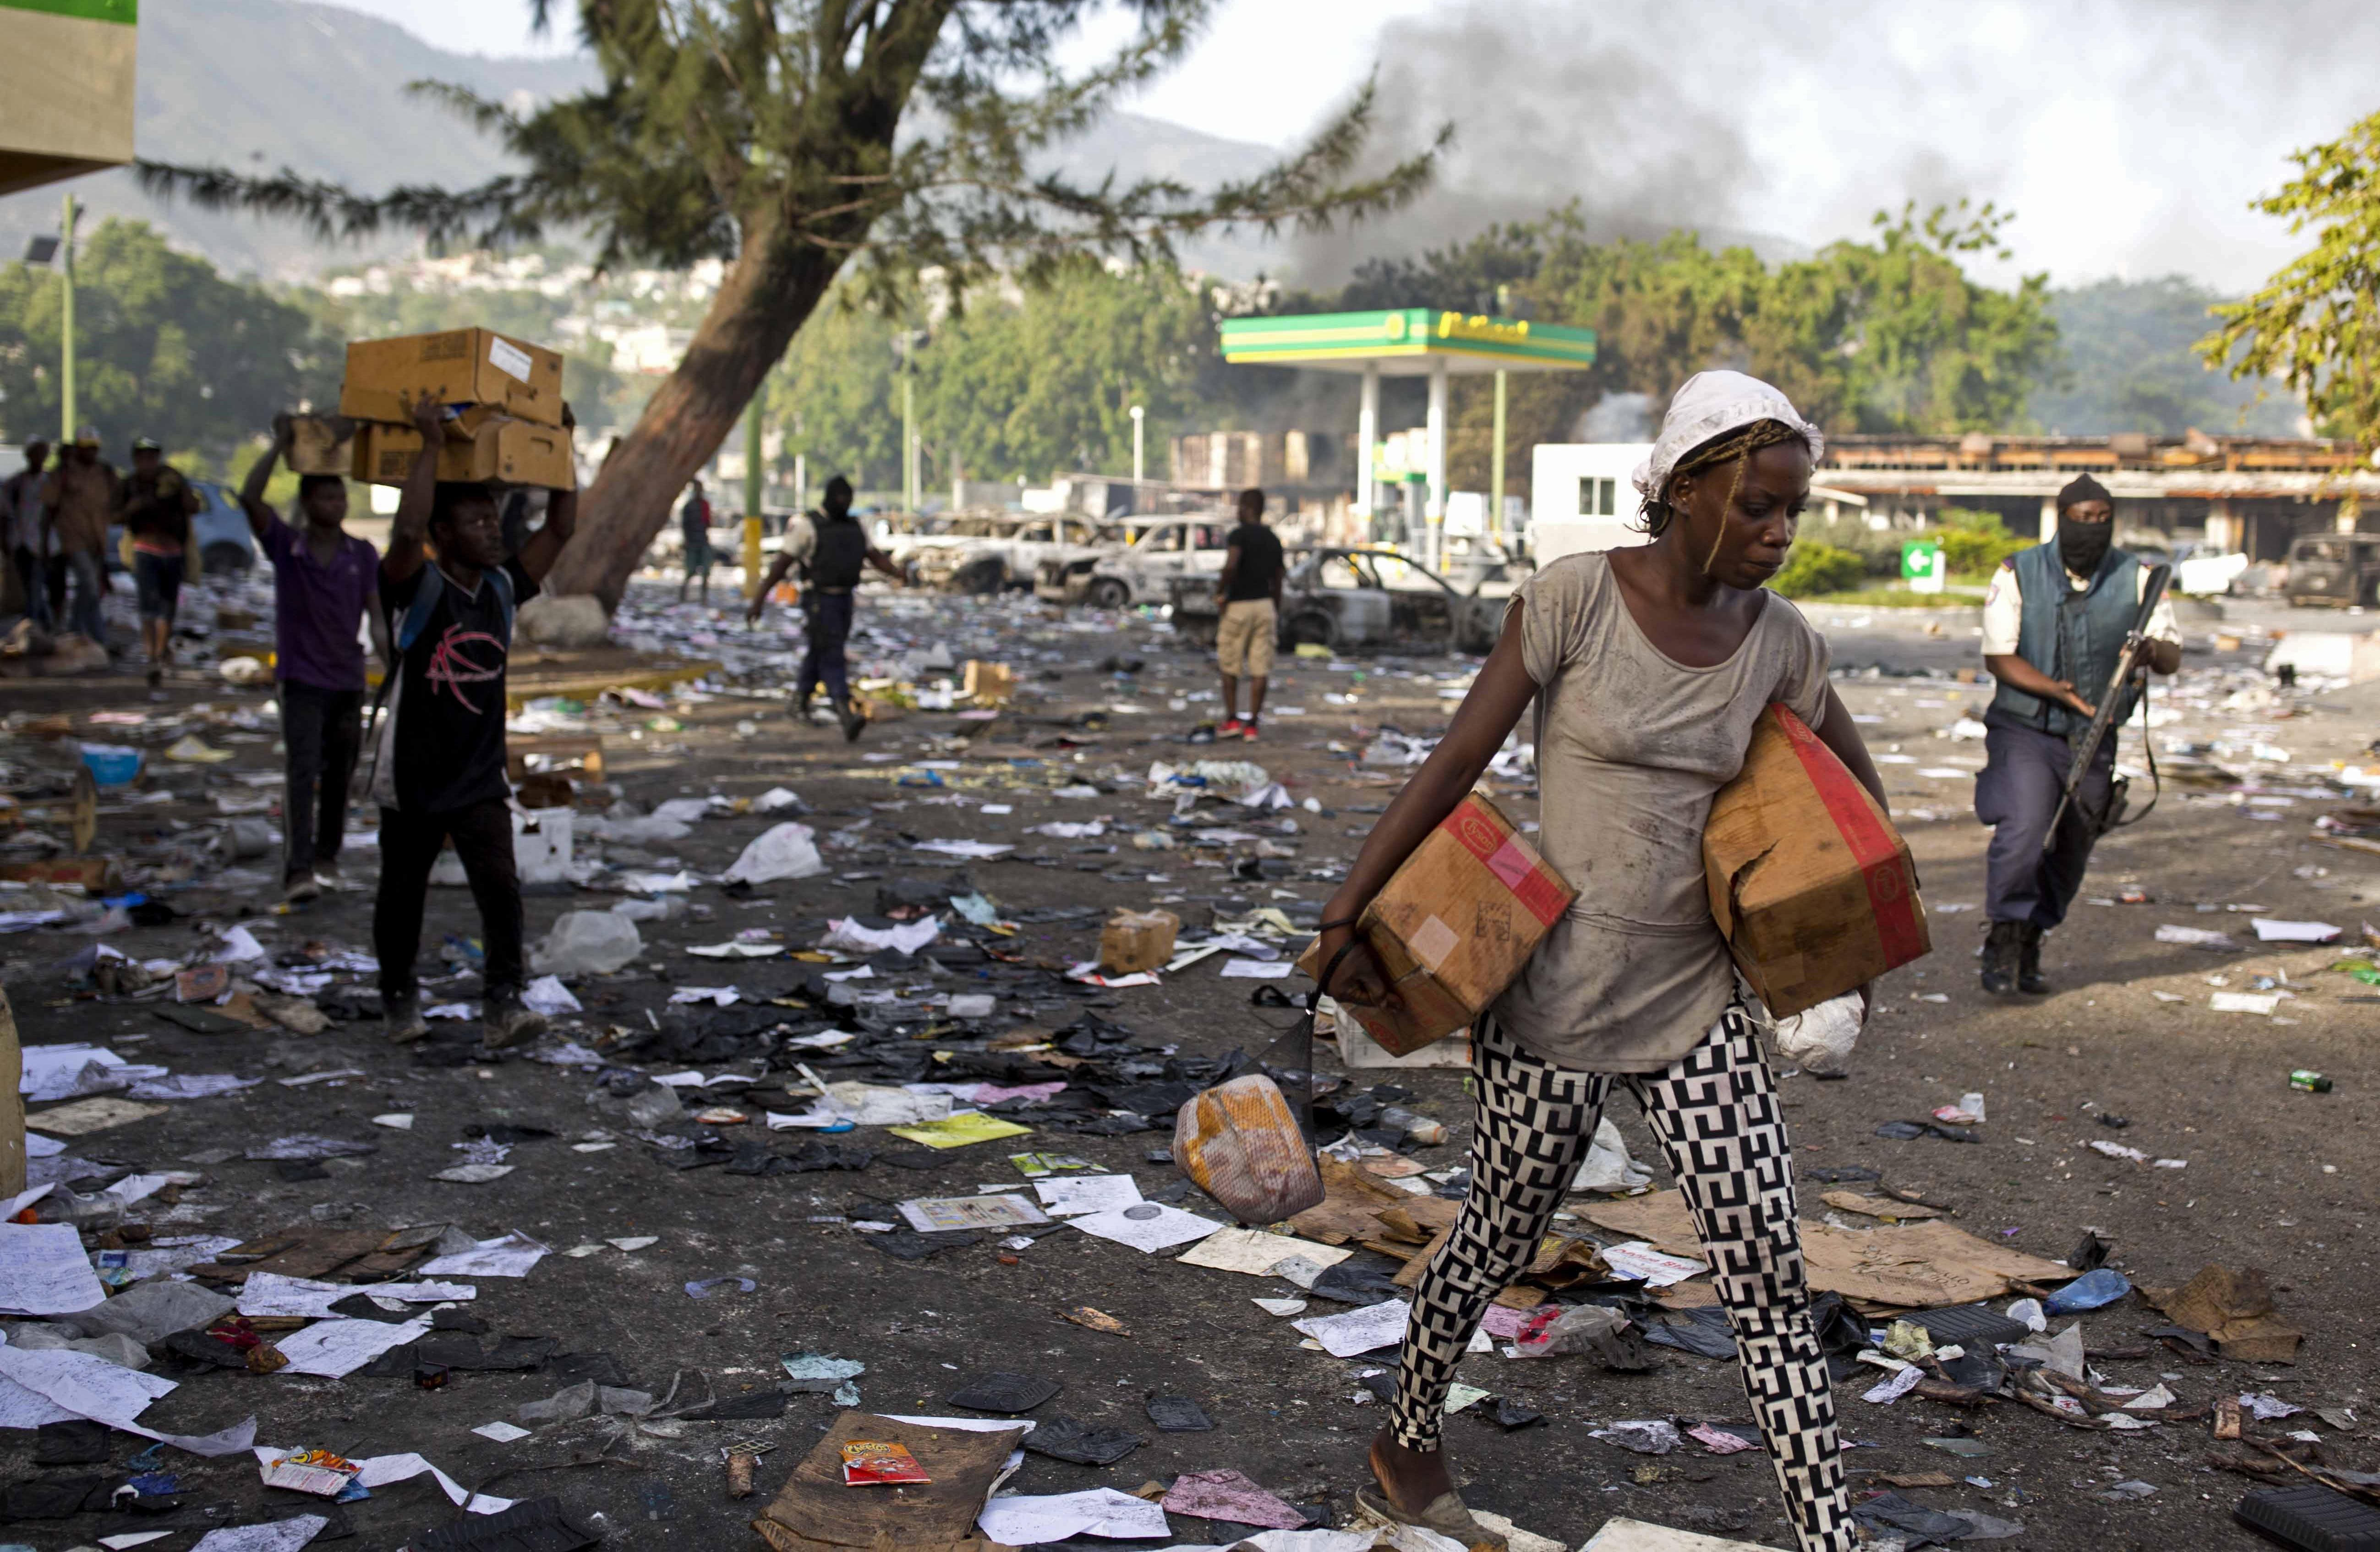 People carry merchandise from the Delimart supermarket complex in Port-au-Prince